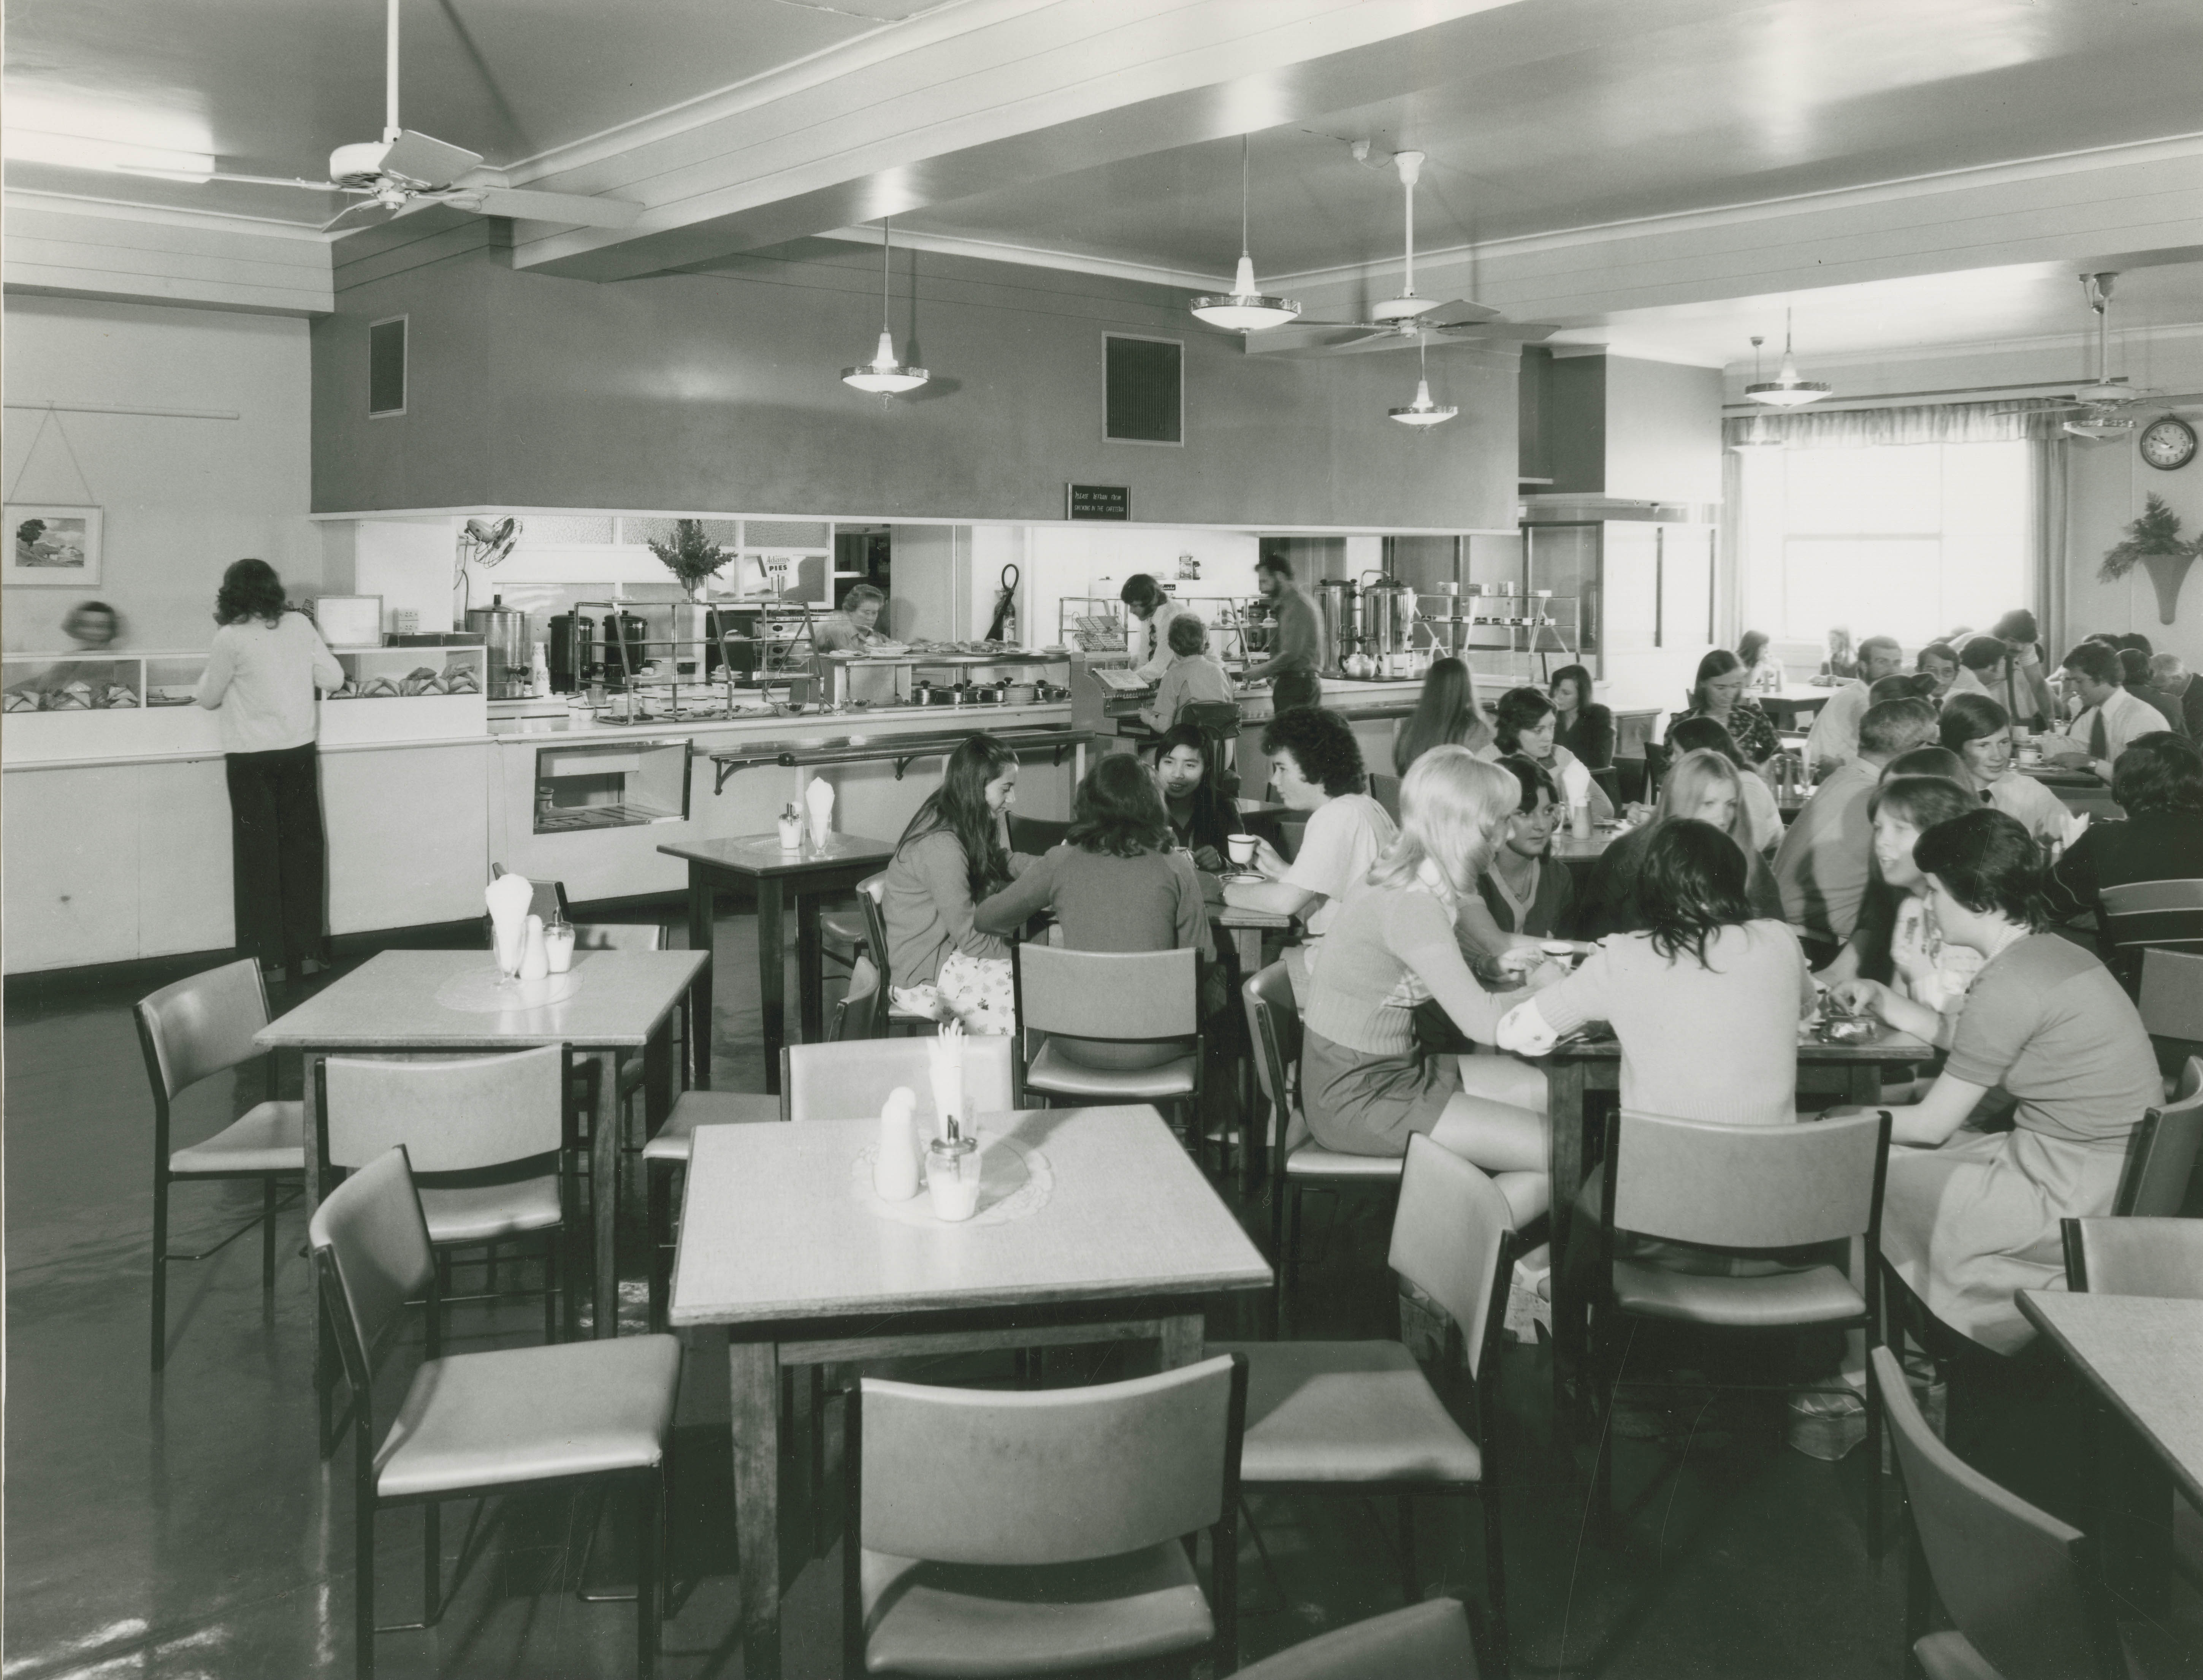 Stae Bsank of Victoria staff cafeteria,1974